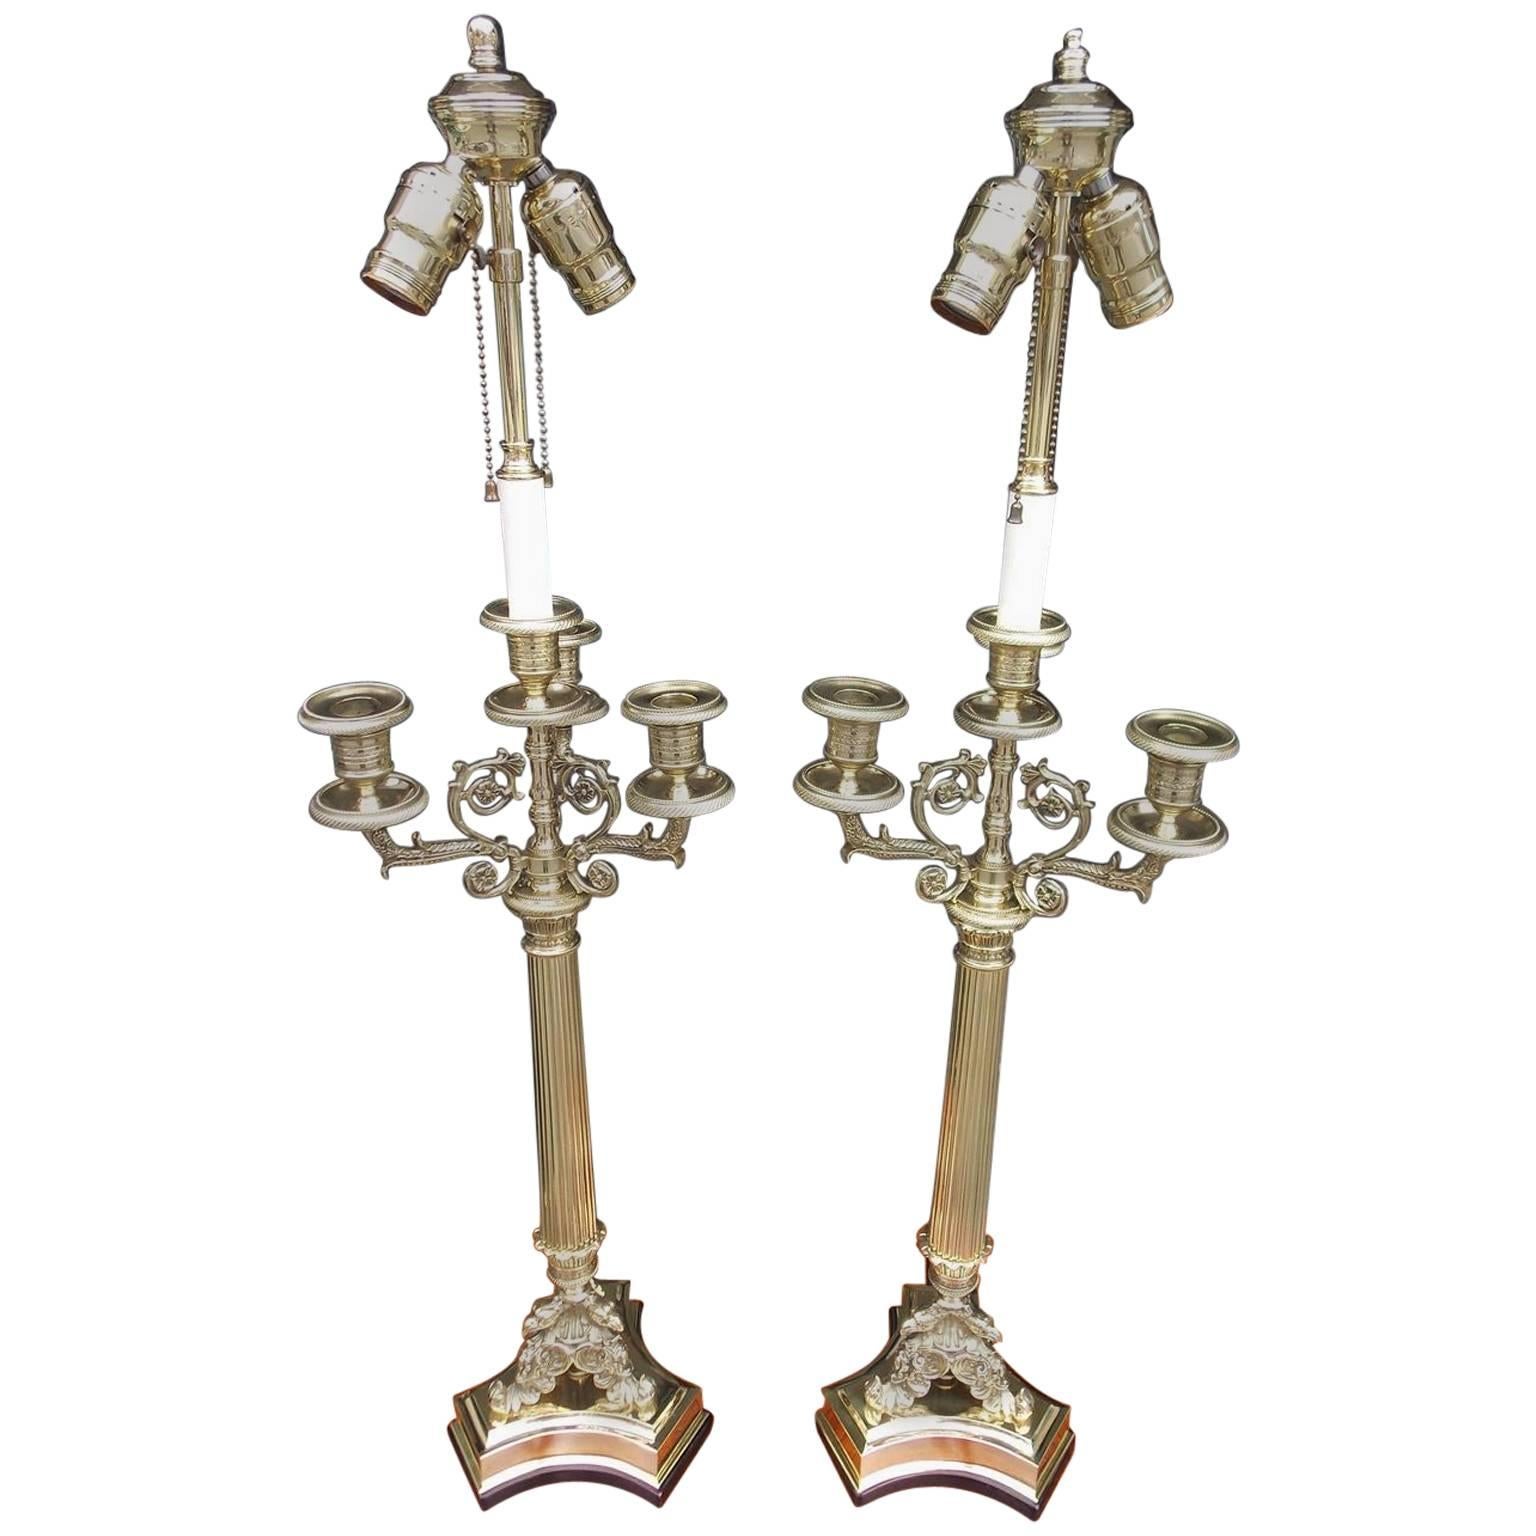 Pair of French Brass Candelabra Lamps with Eagle Acanthus Motif, Circa 1820